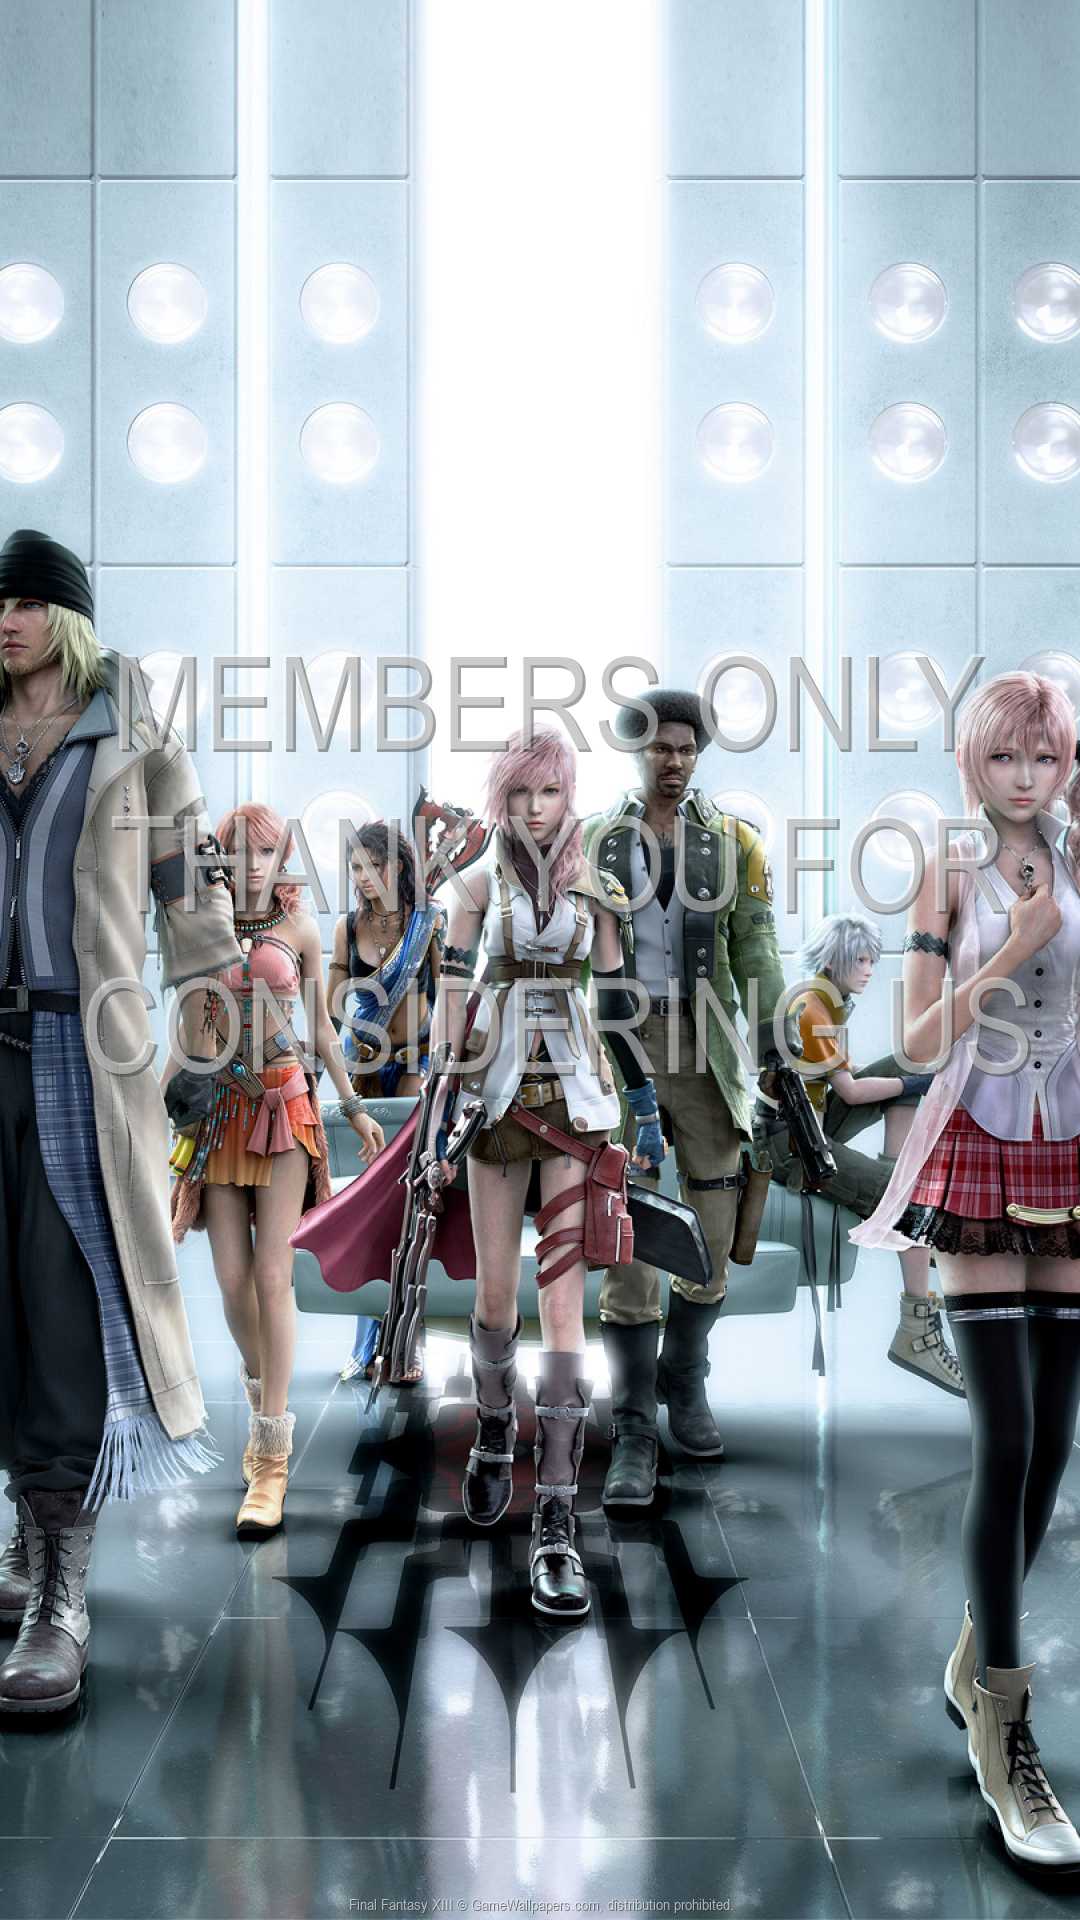 Final Fantasy XIII 1080p%20Vertical Mobile wallpaper or background 12